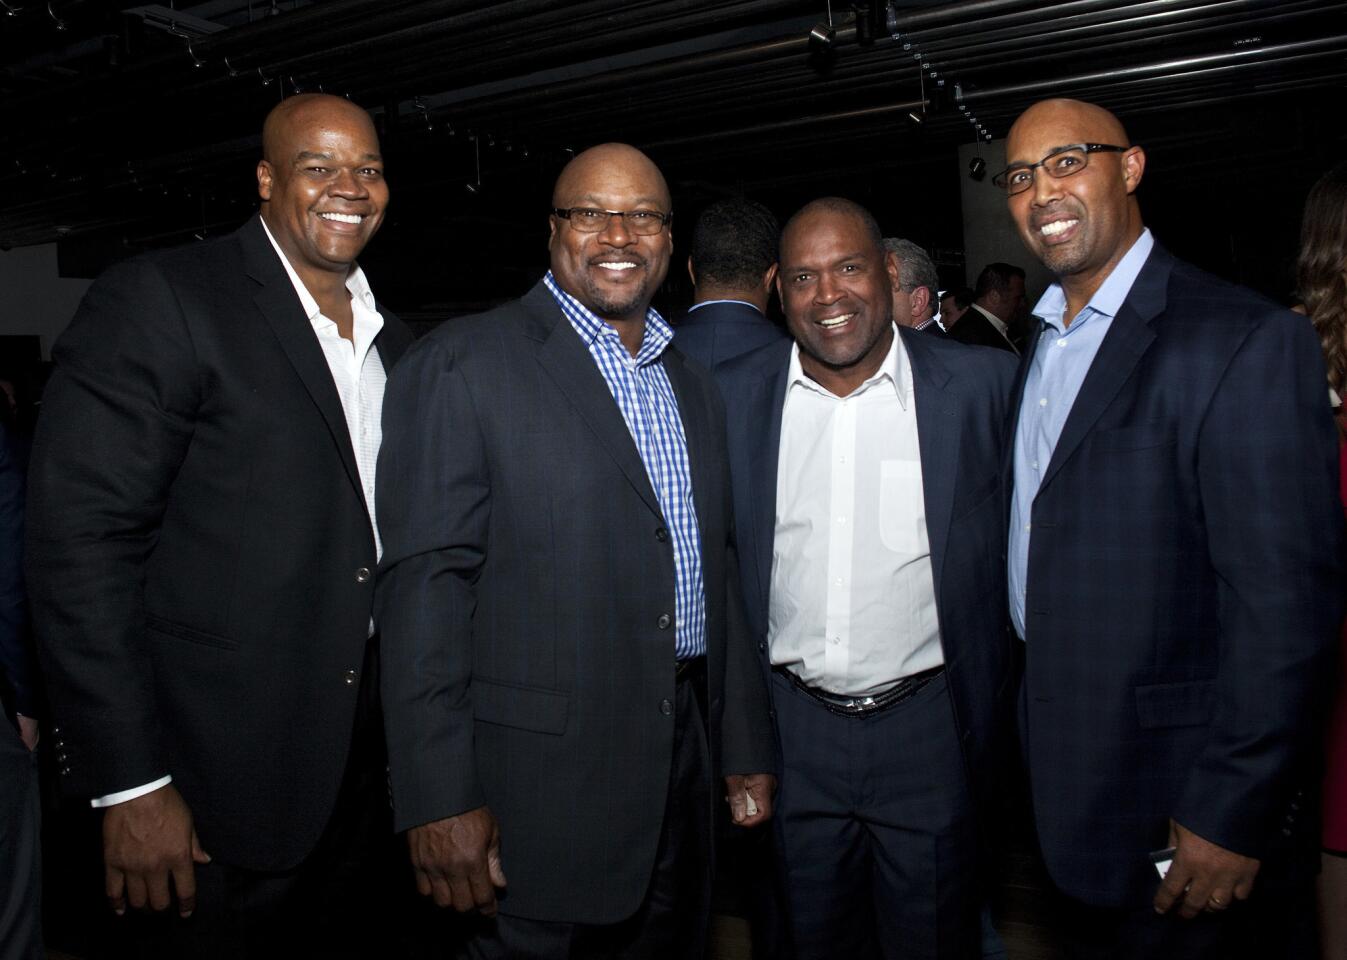 Frank Thomas, Bo Jackson, Tim Raines and Harold Baines during an event for White Sox Charities on April 10, 2018.